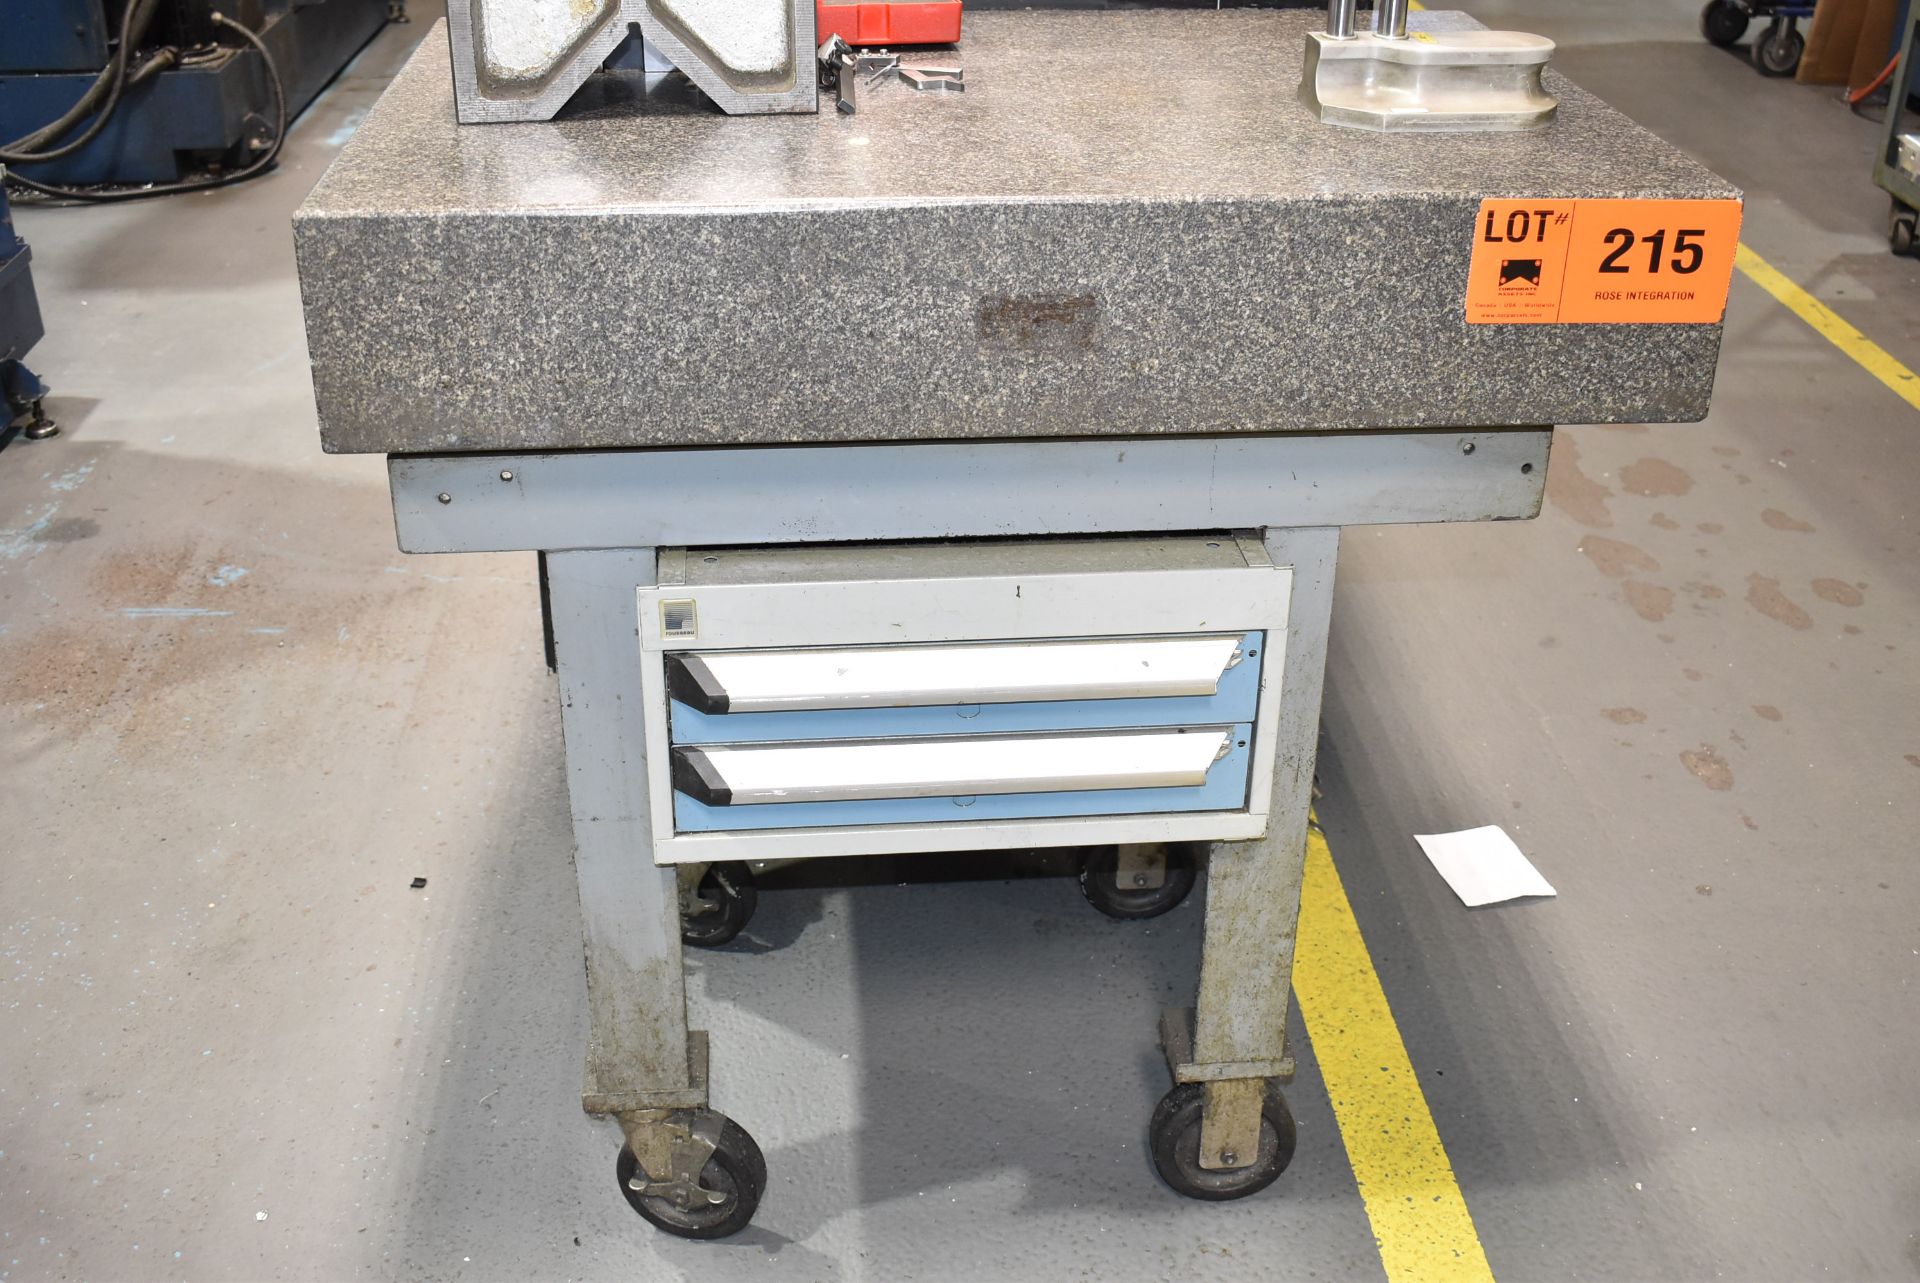 MFG UNKNOWN 24" X 36" X 6" GRANITE SURFACE PLATE WITH ROLLING STAND, S/N N/A